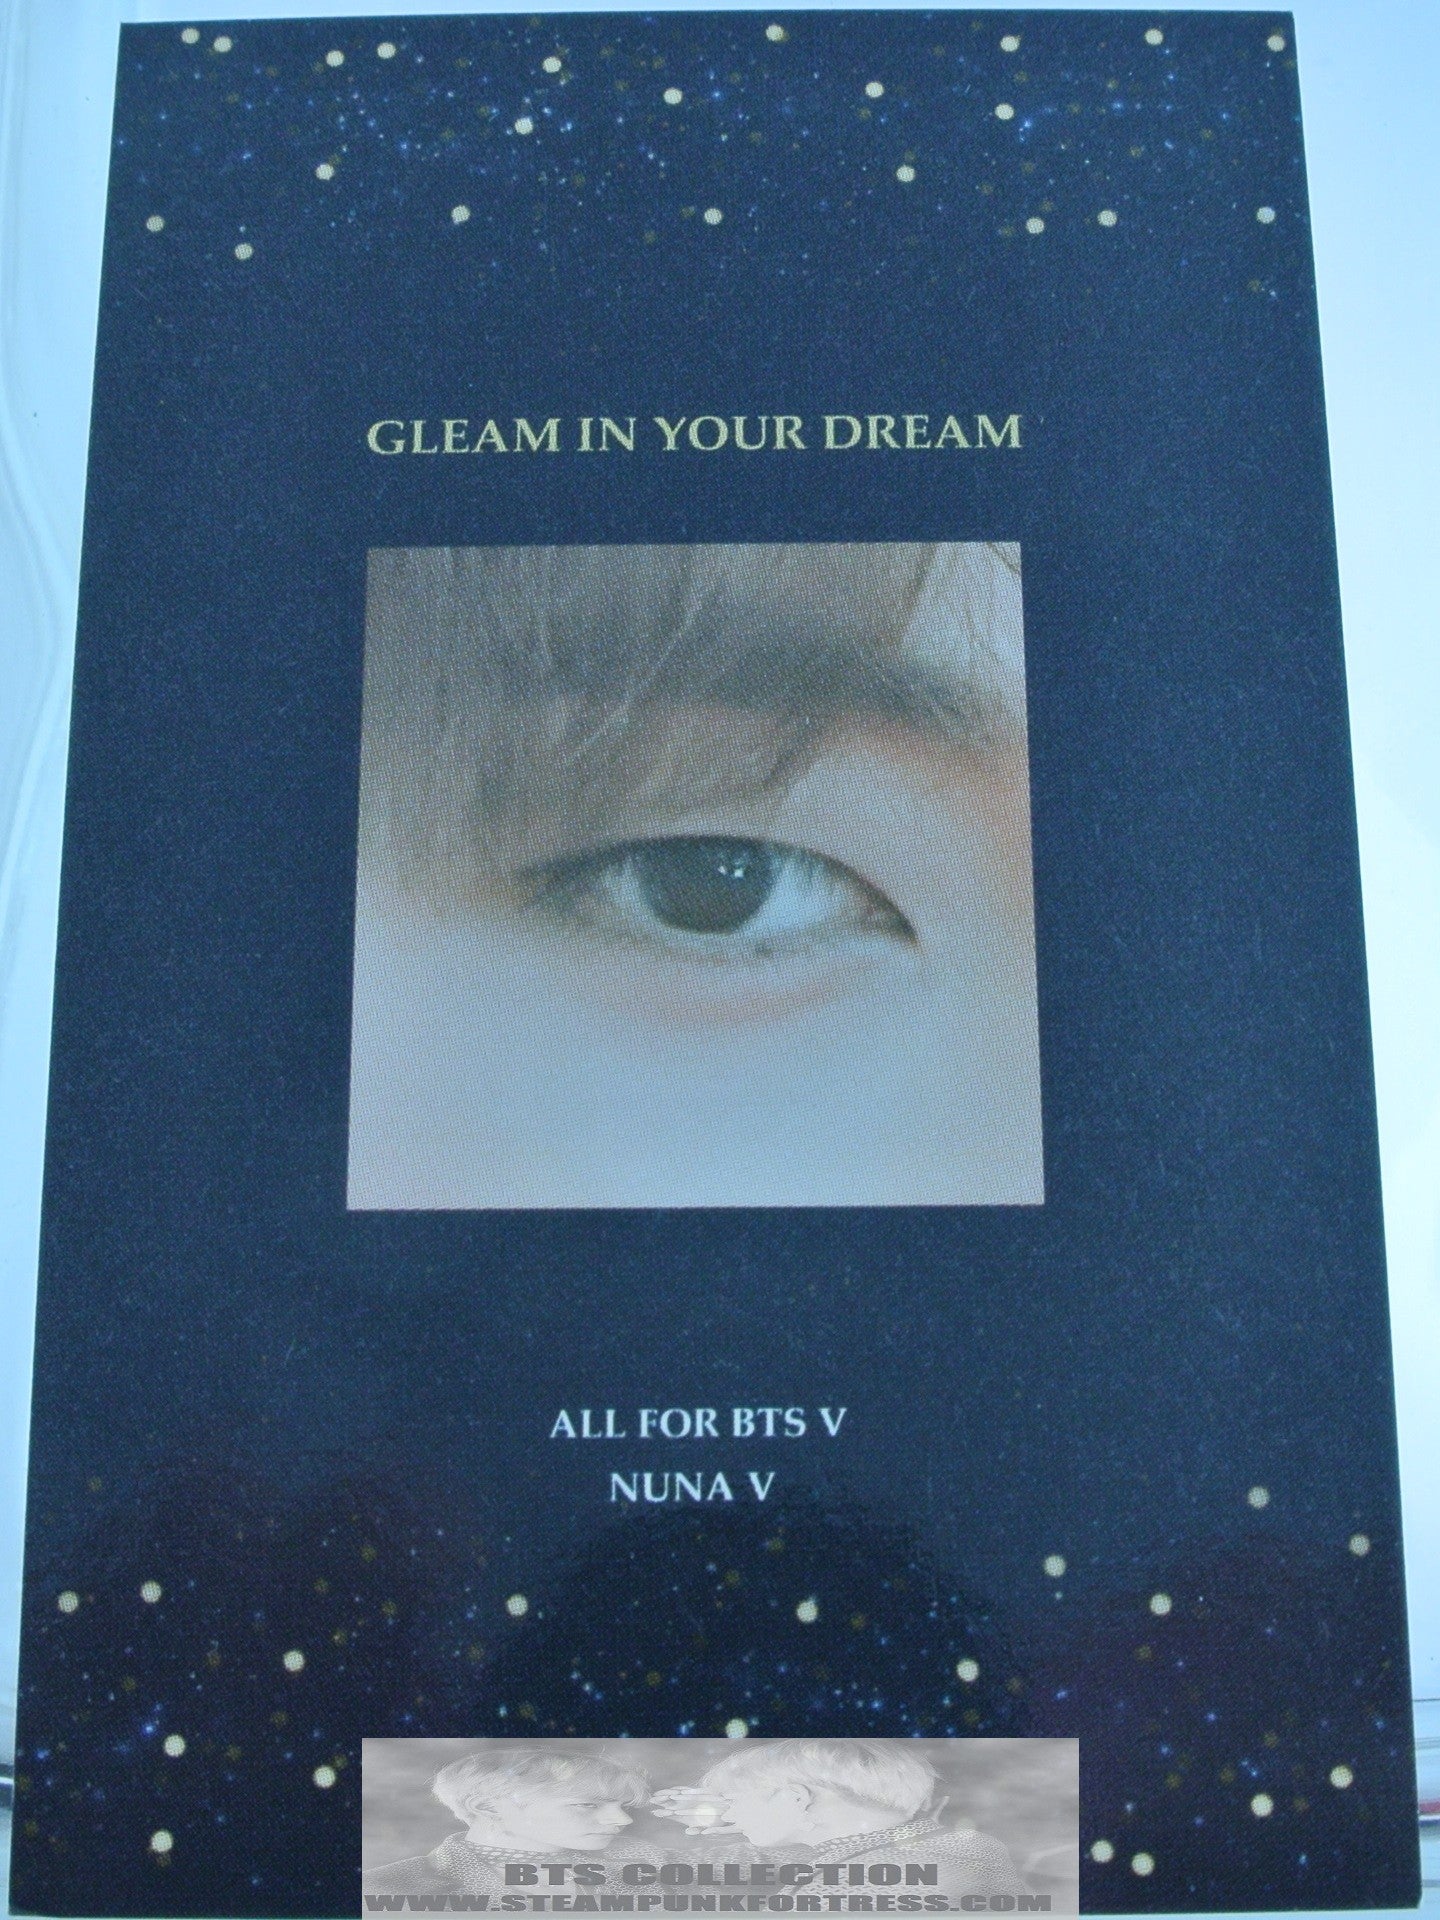 BTS V KIM TAEHYUNG FANSITE PHOTOCARD BROWN SUIT GLEAM IN YOUR DREAM NUNA V PHOTO CARD